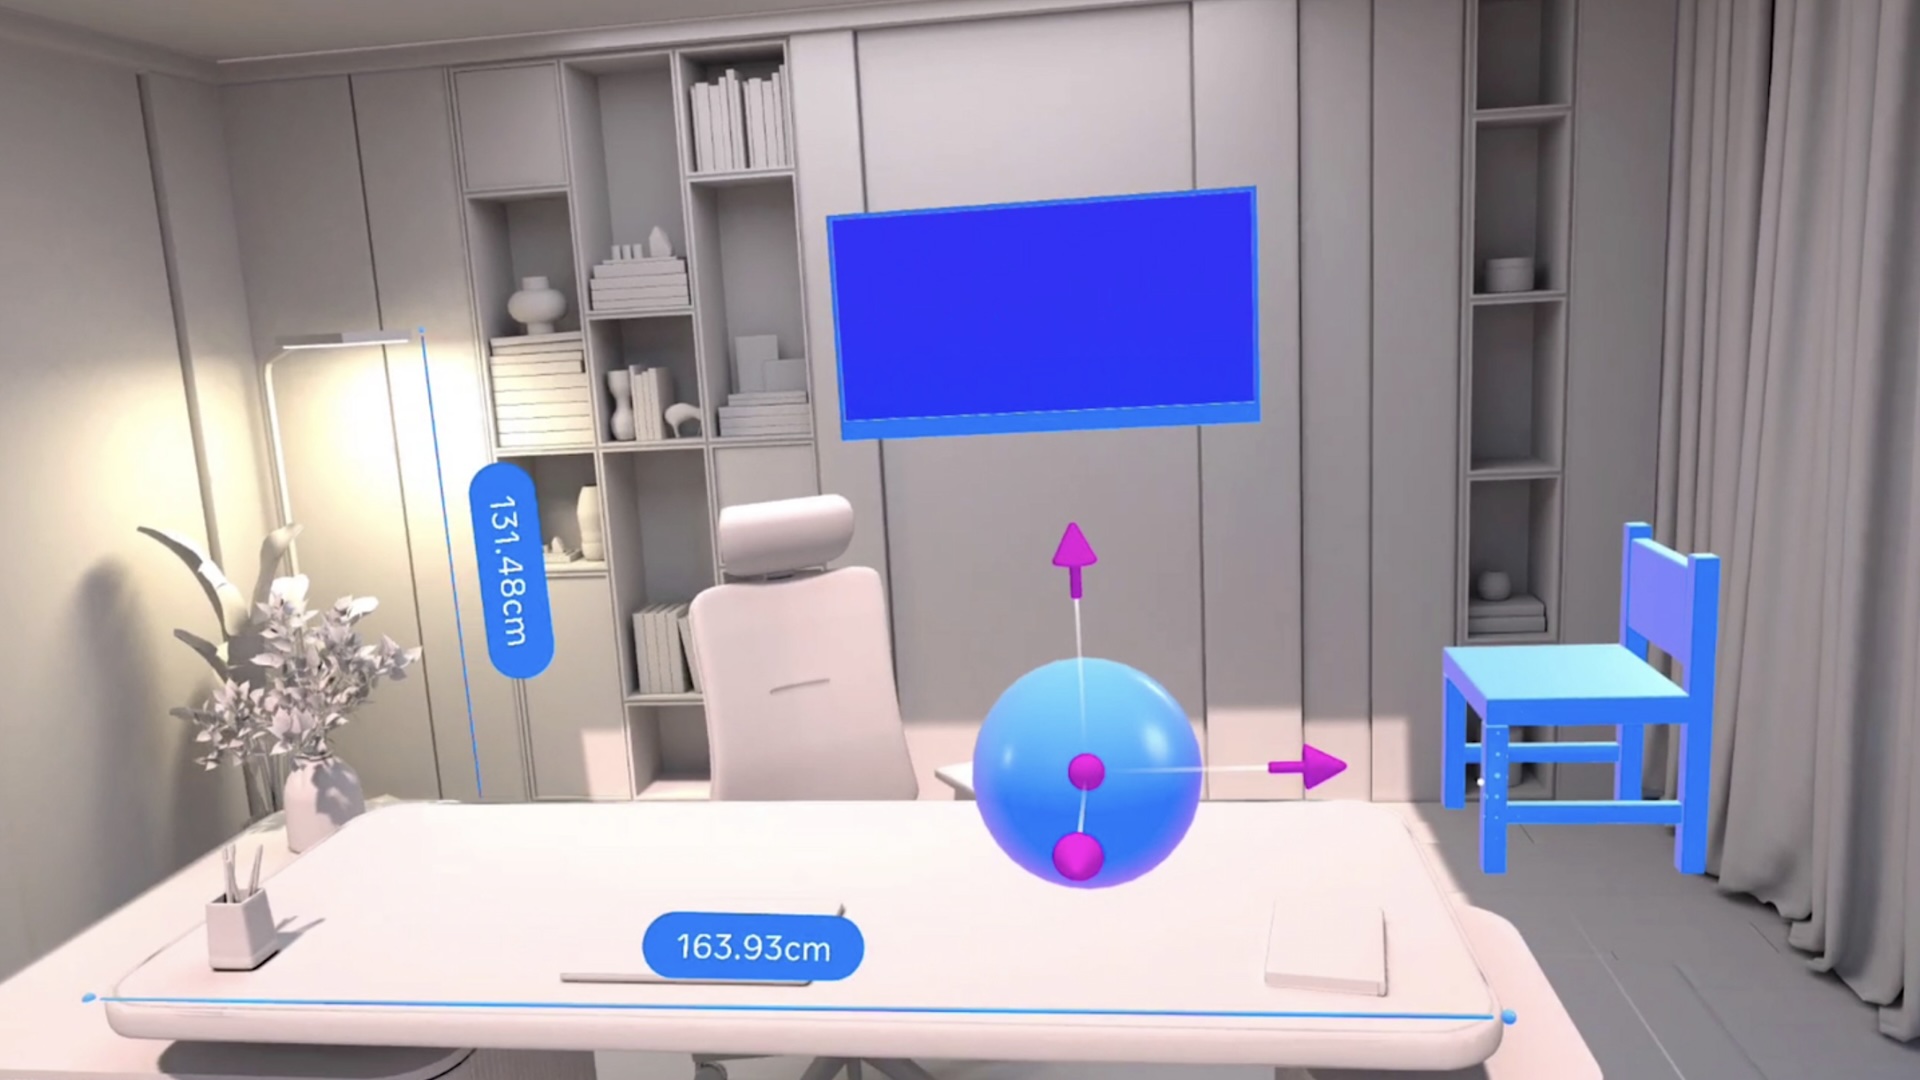 What is Layout, Meta’s new mixed reality app?